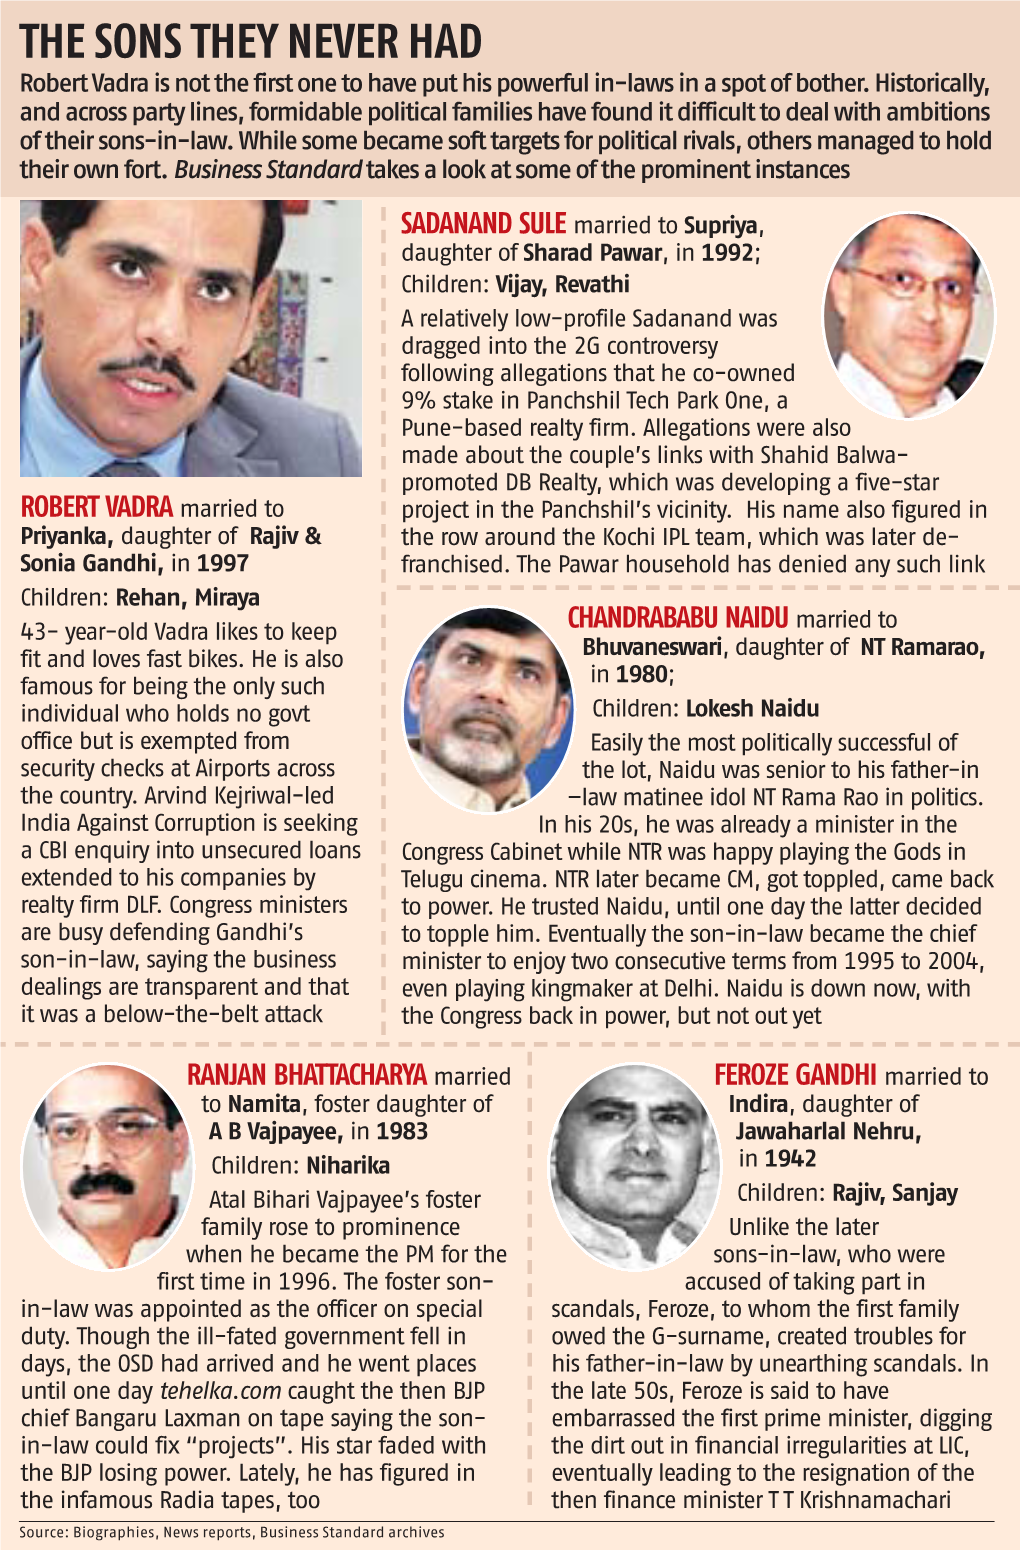 THE SONS THEY NEVER HAD Robert Vadra Is Not the First One to Have Put His Powerful In-Laws in a Spot of Bother